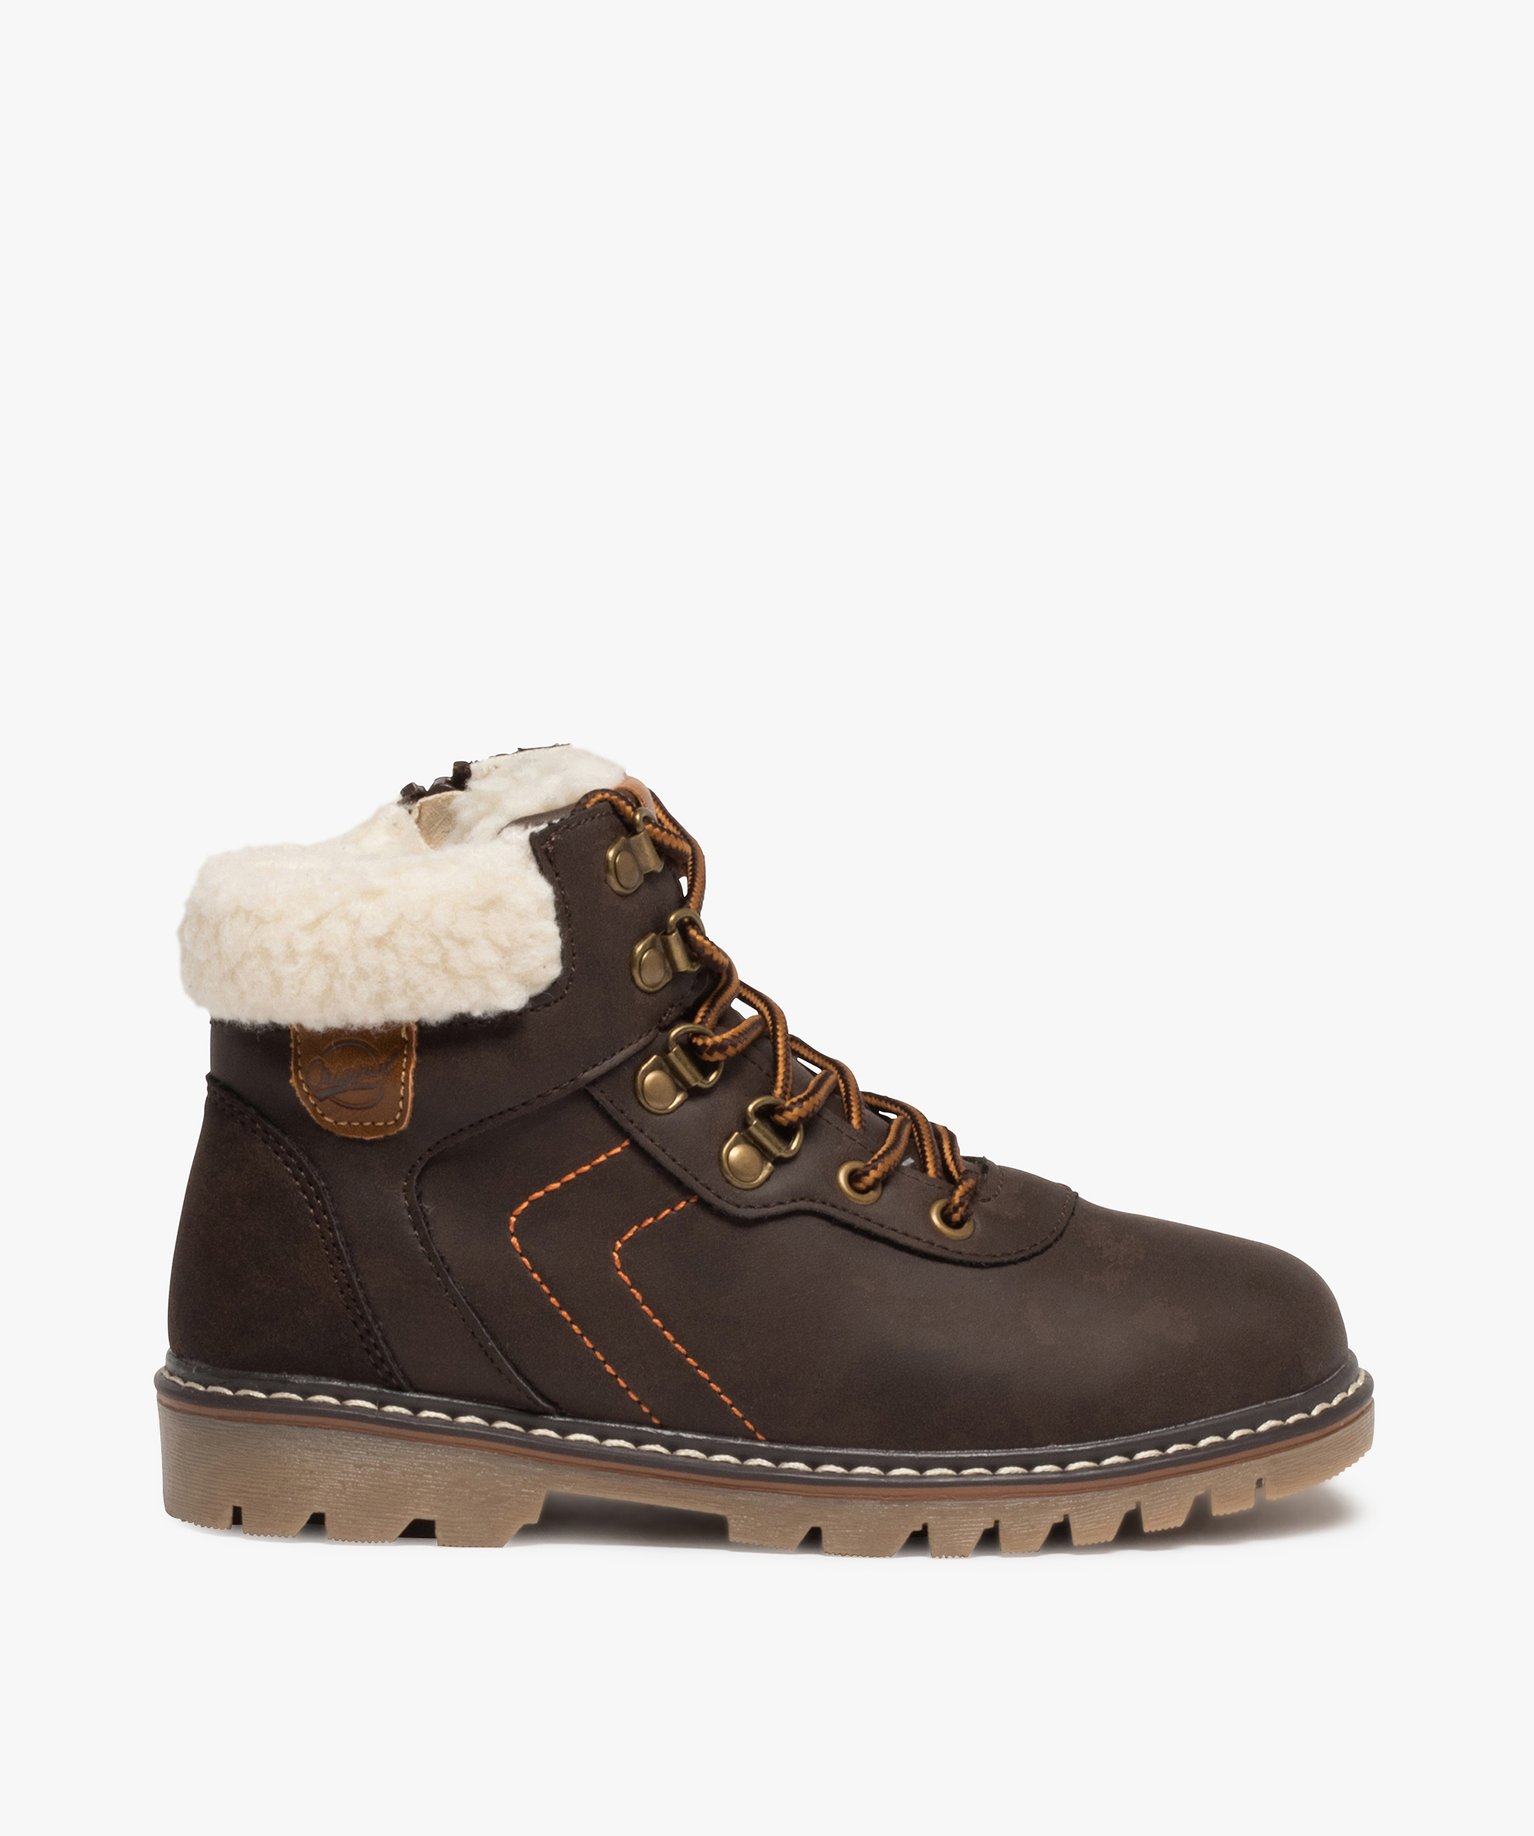 boots garcon style chaussures de montagne a col sherpa brun